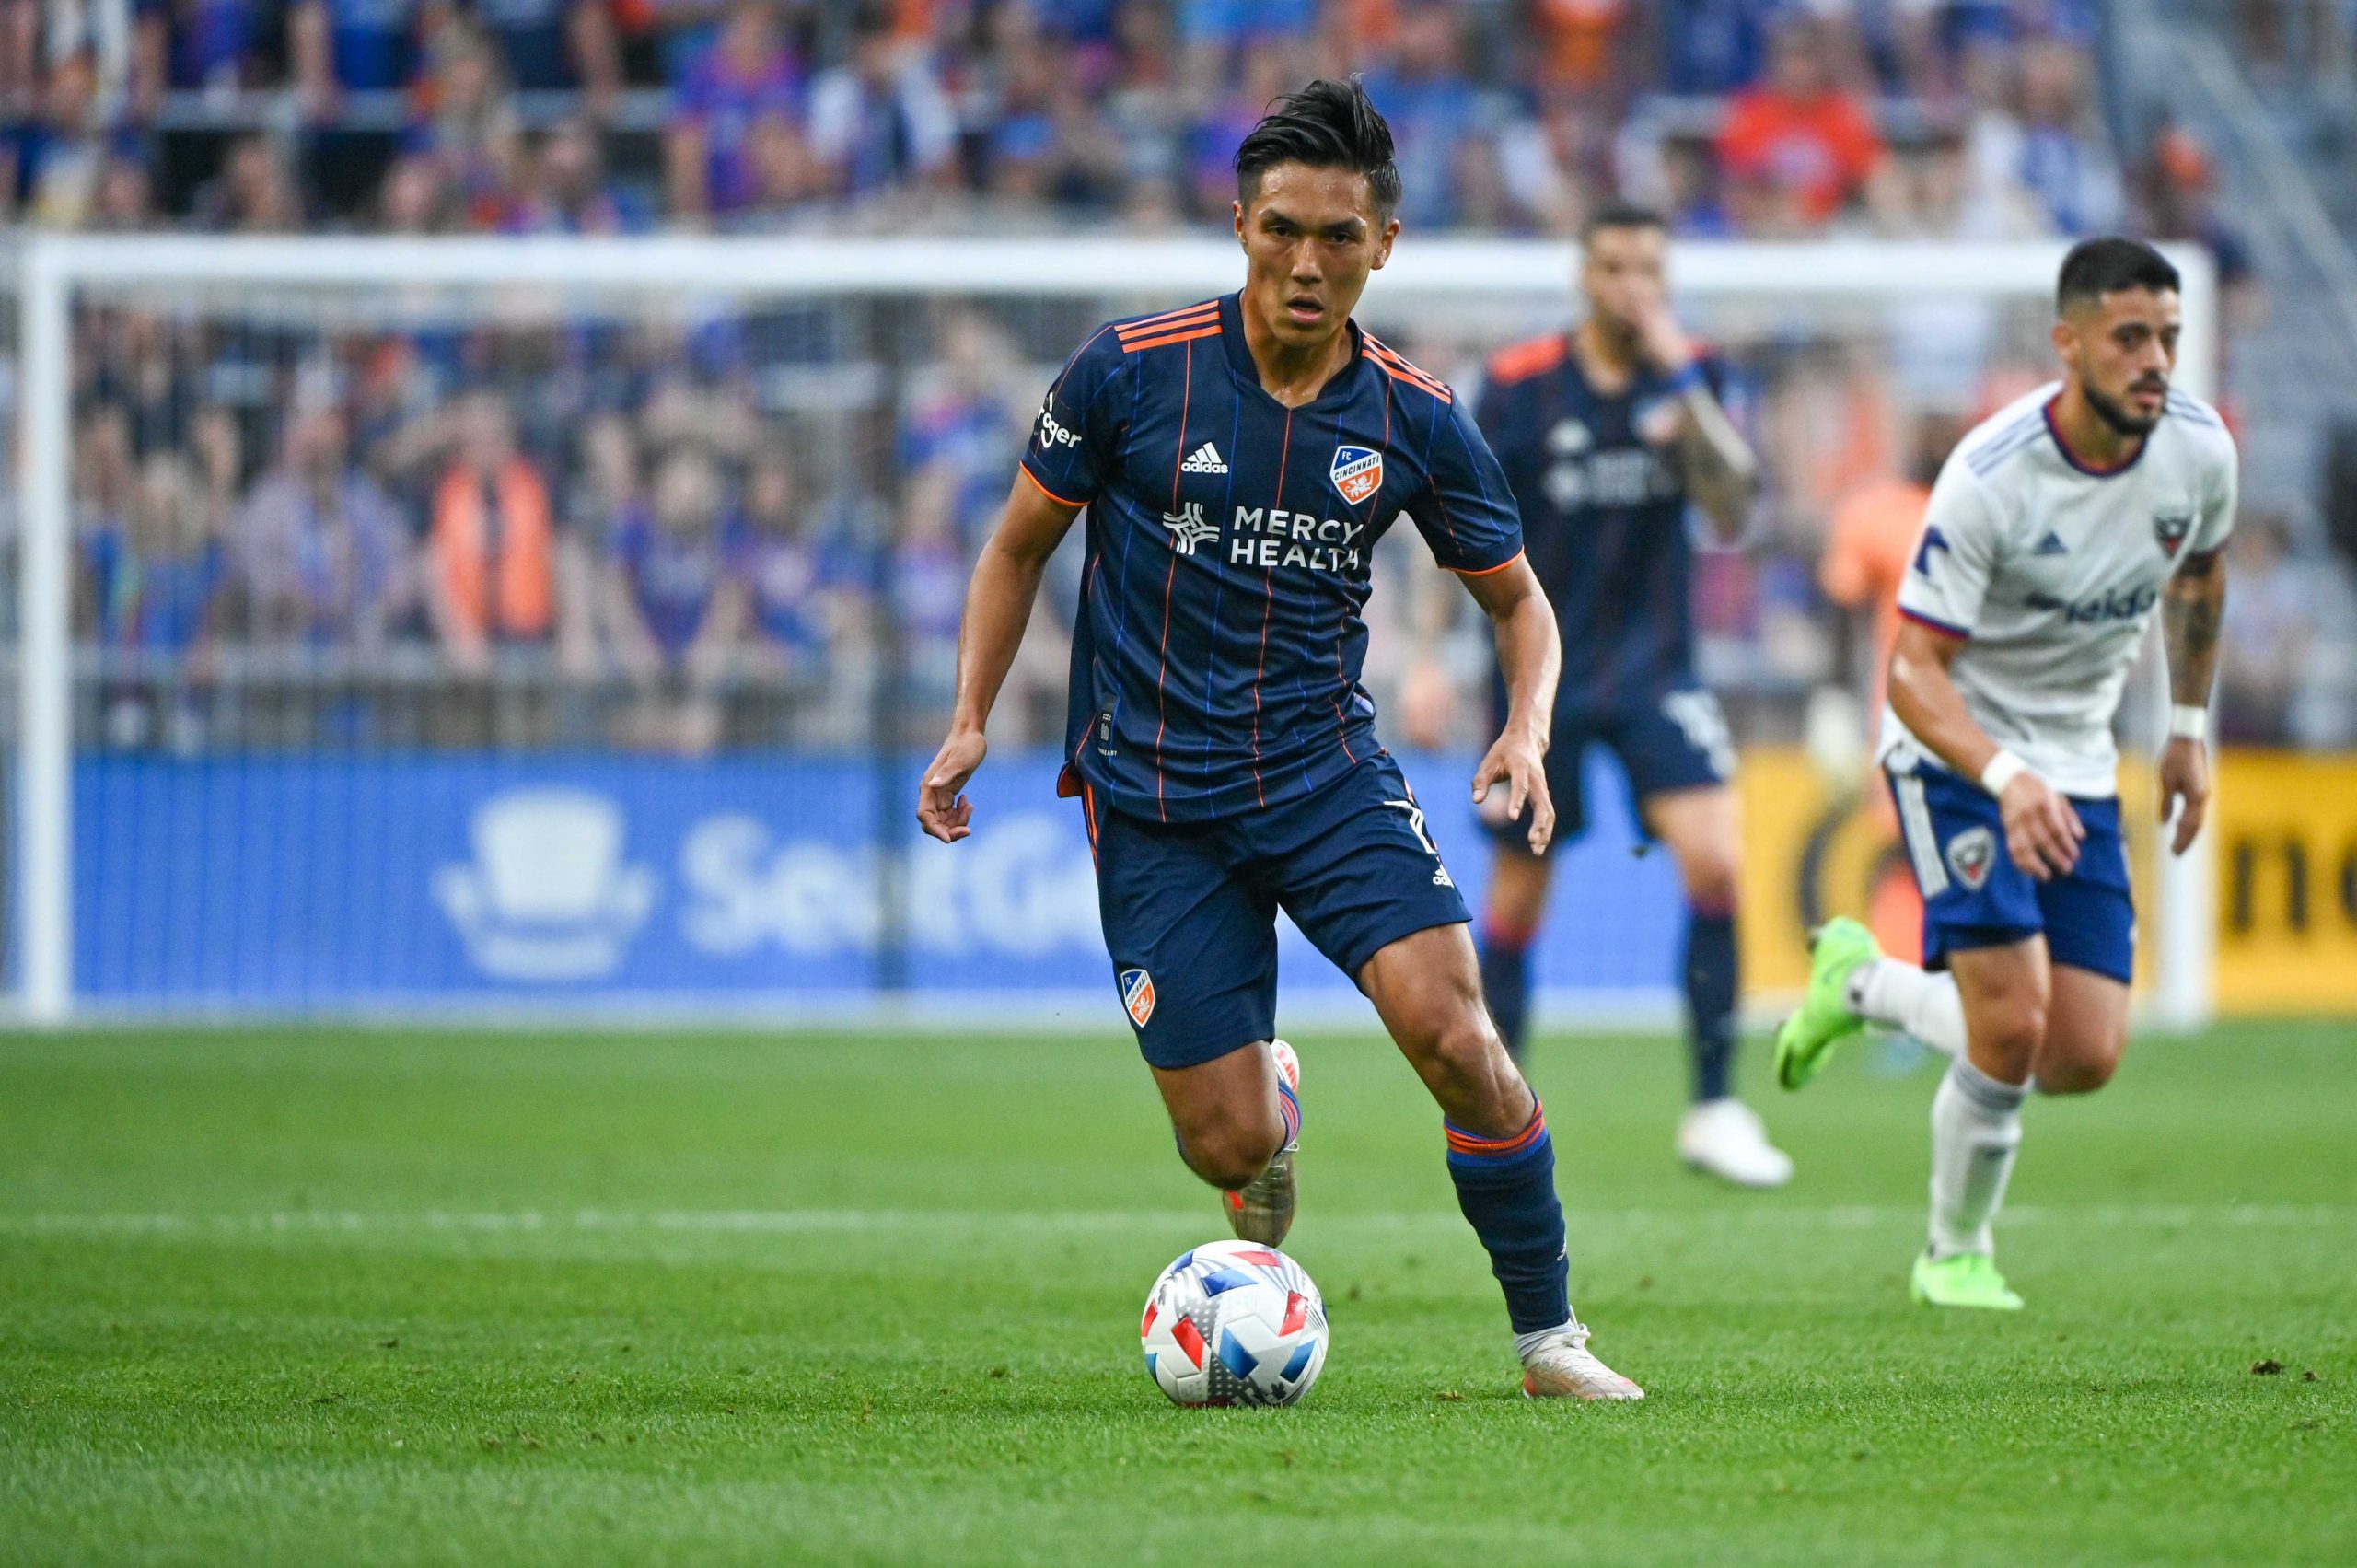 FC Cincinnati remains winless at TQL after 0-0 draw with D.C.